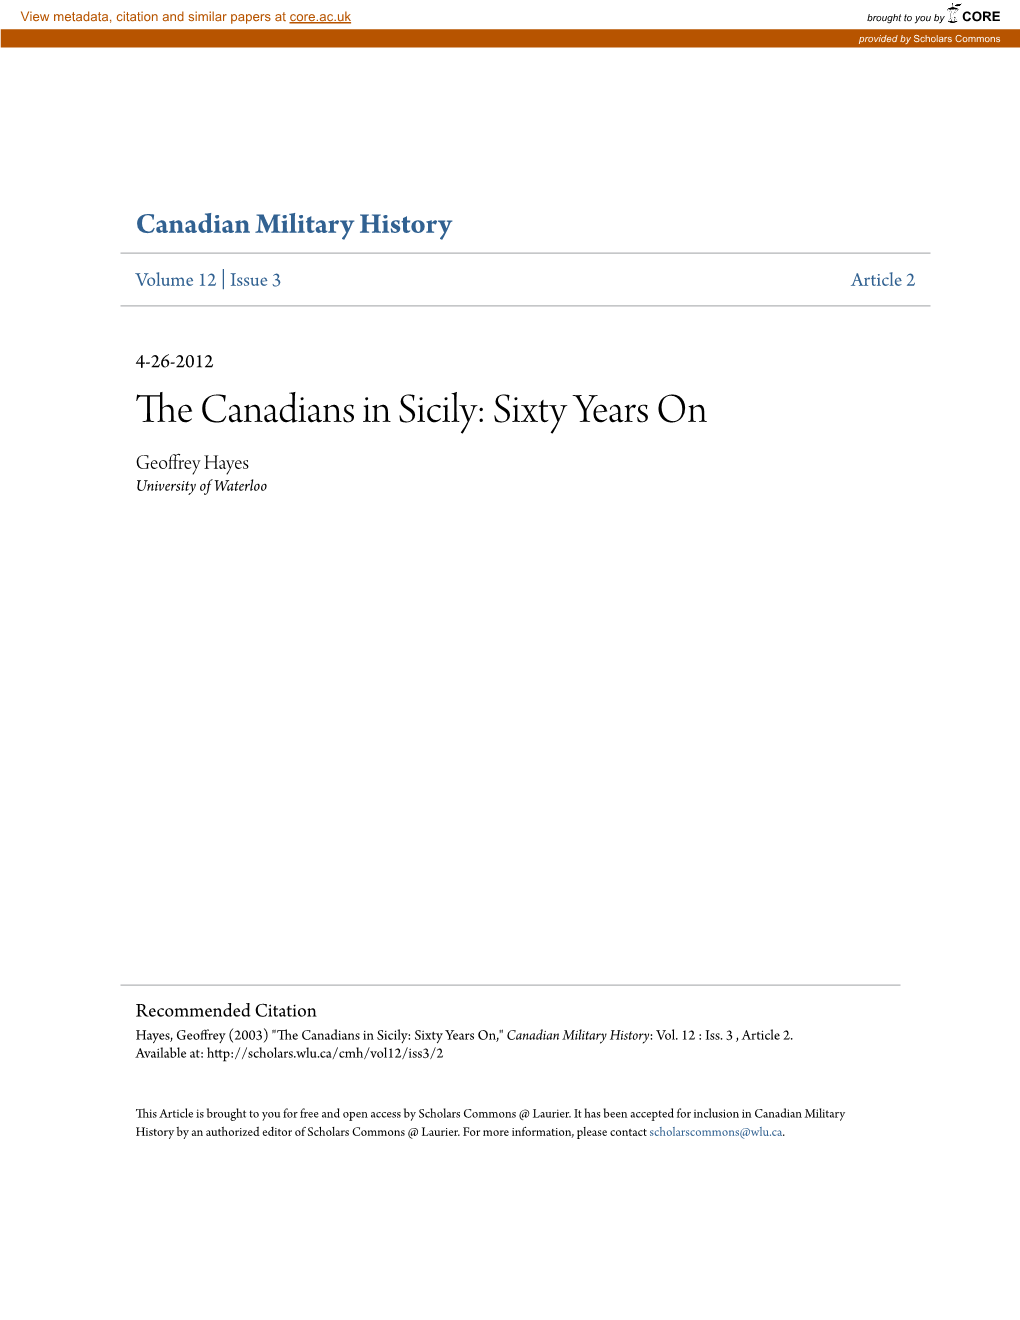 The Canadians in Sicily Sixty Years On